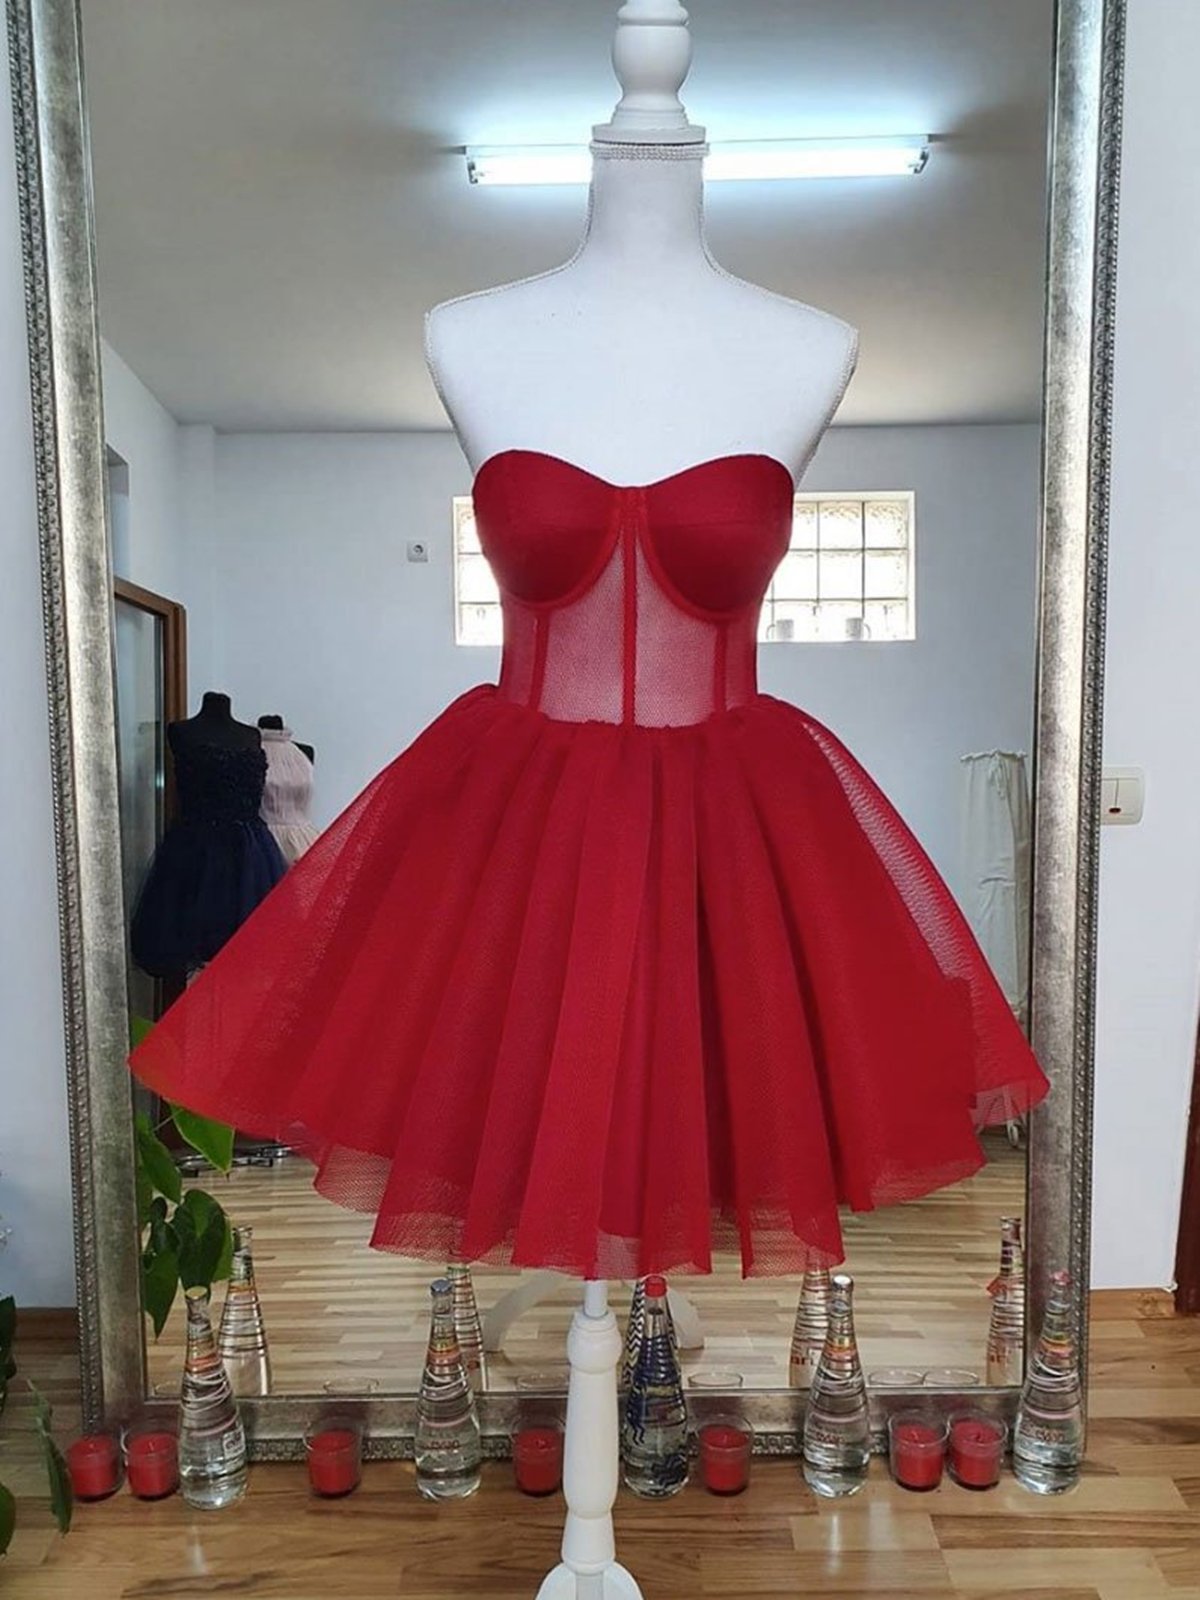 Party Dresses In Store, Sweetheart Neck Short Red Prom Dresses, Short Red Formal Graduation Homecoming Dresses